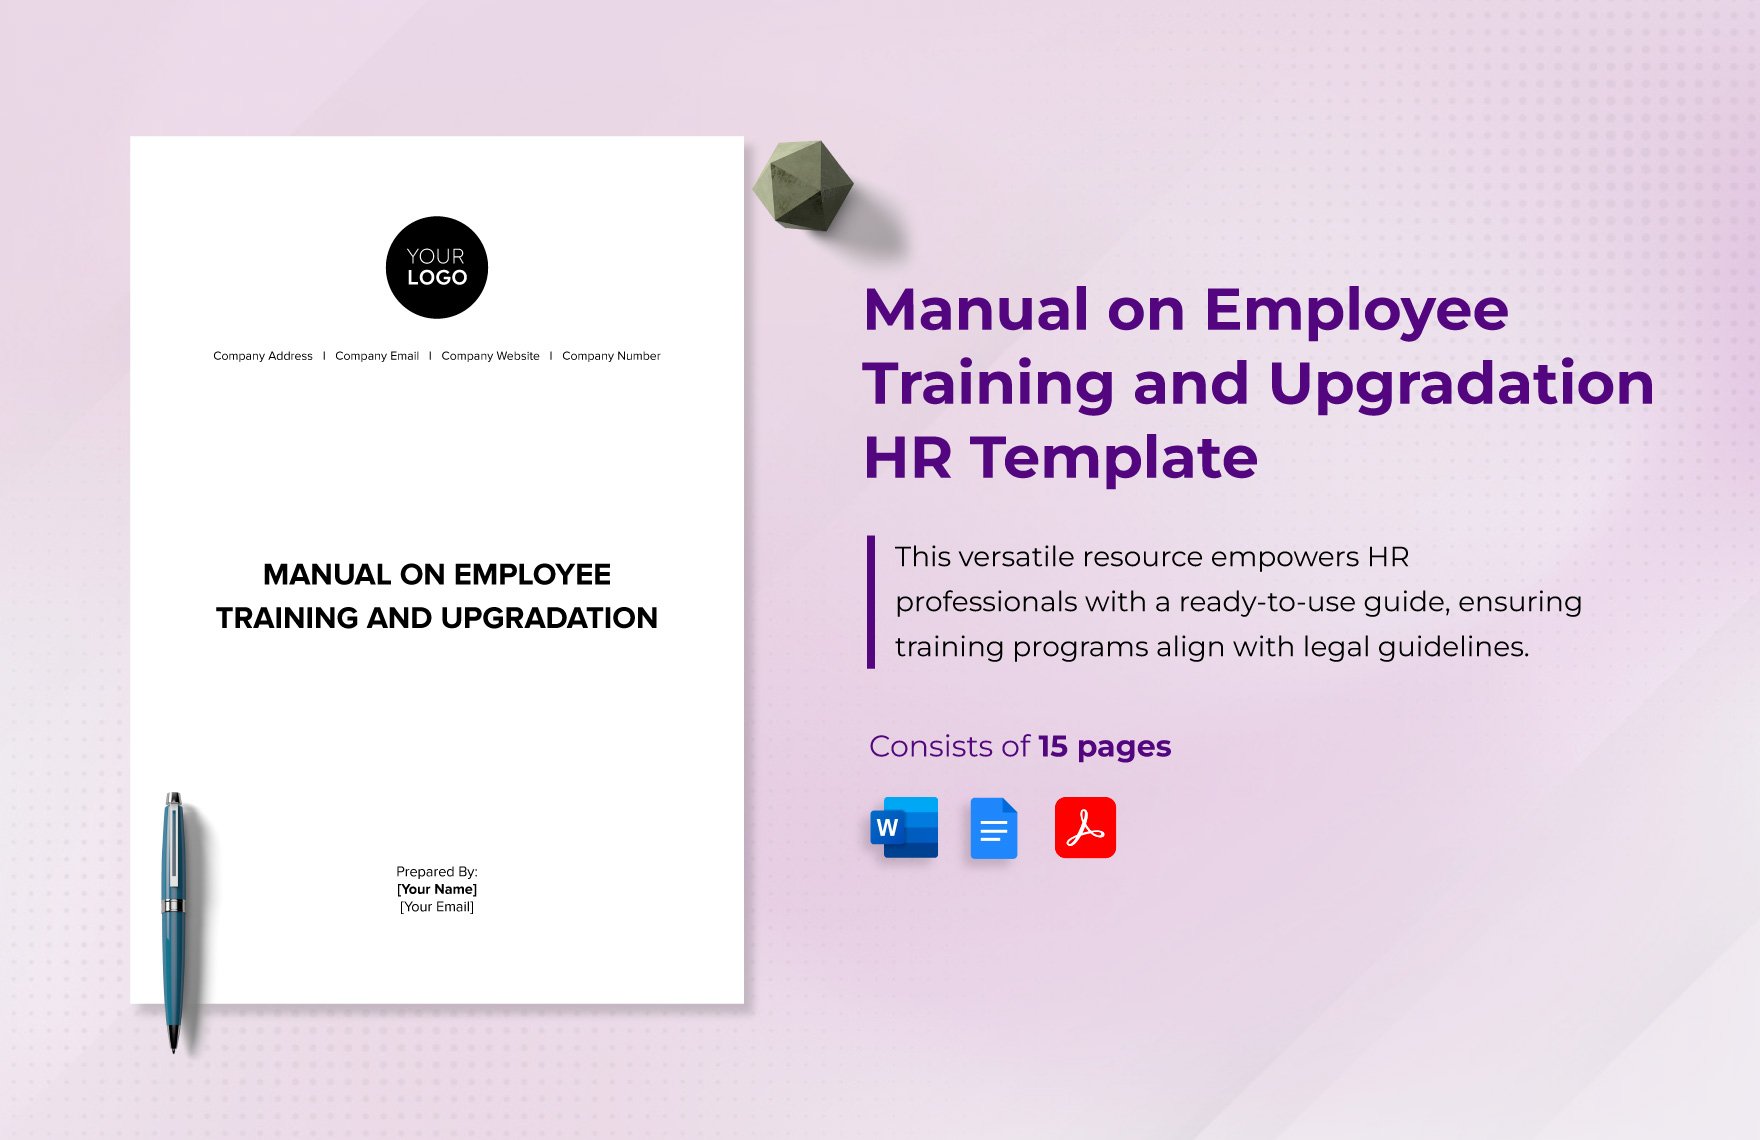 Manual on Employee Training and Upgradation HR Template